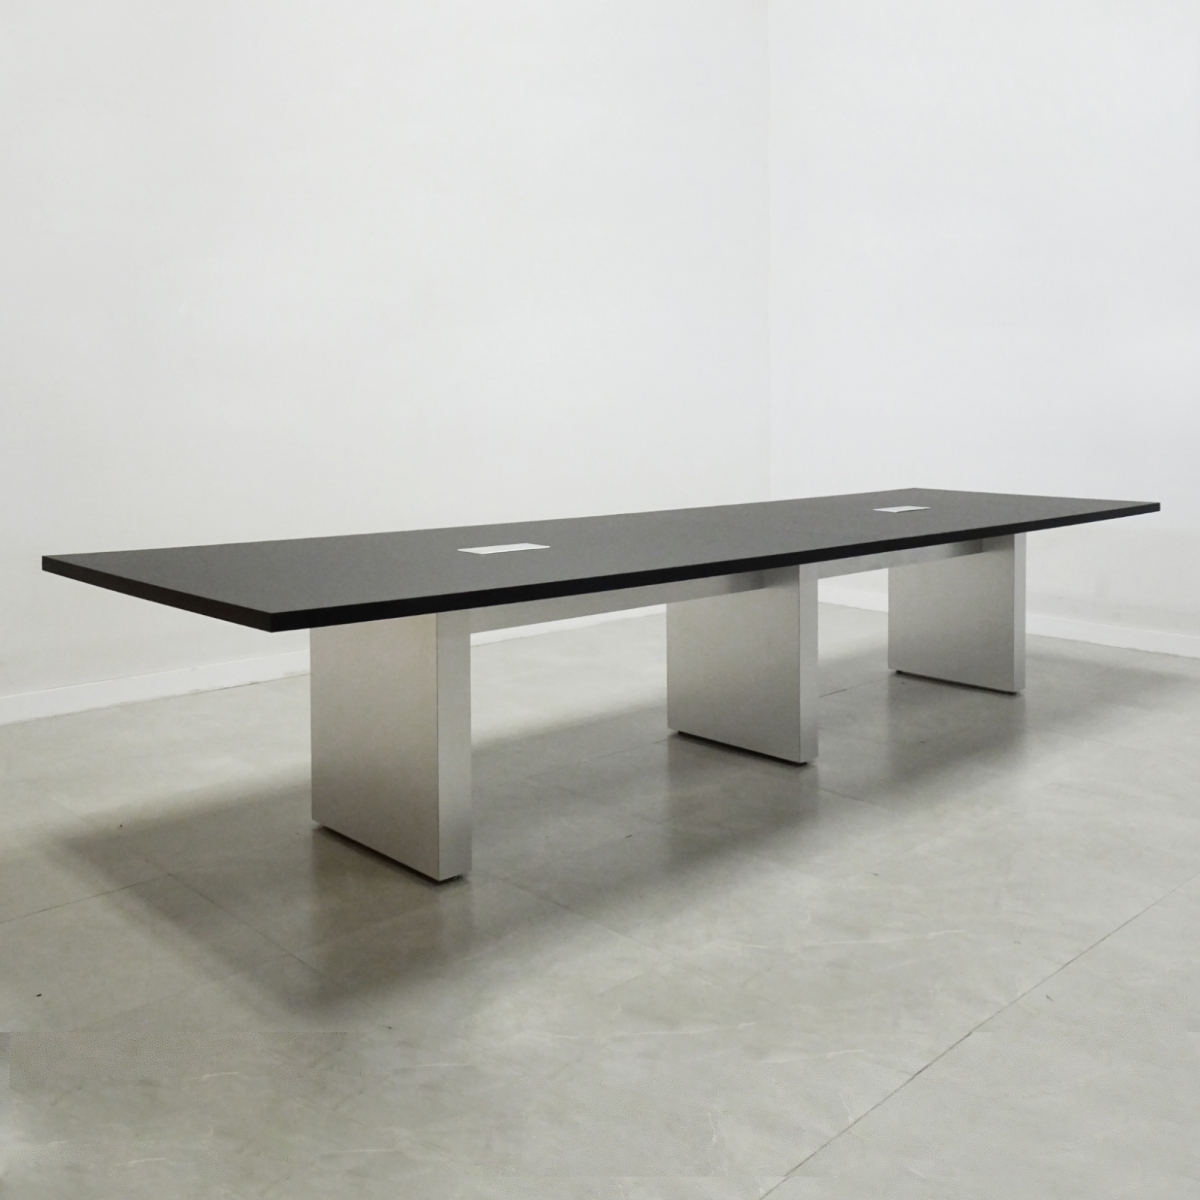 144 In. Axis Black Rectangular Table- Stock #1001-D